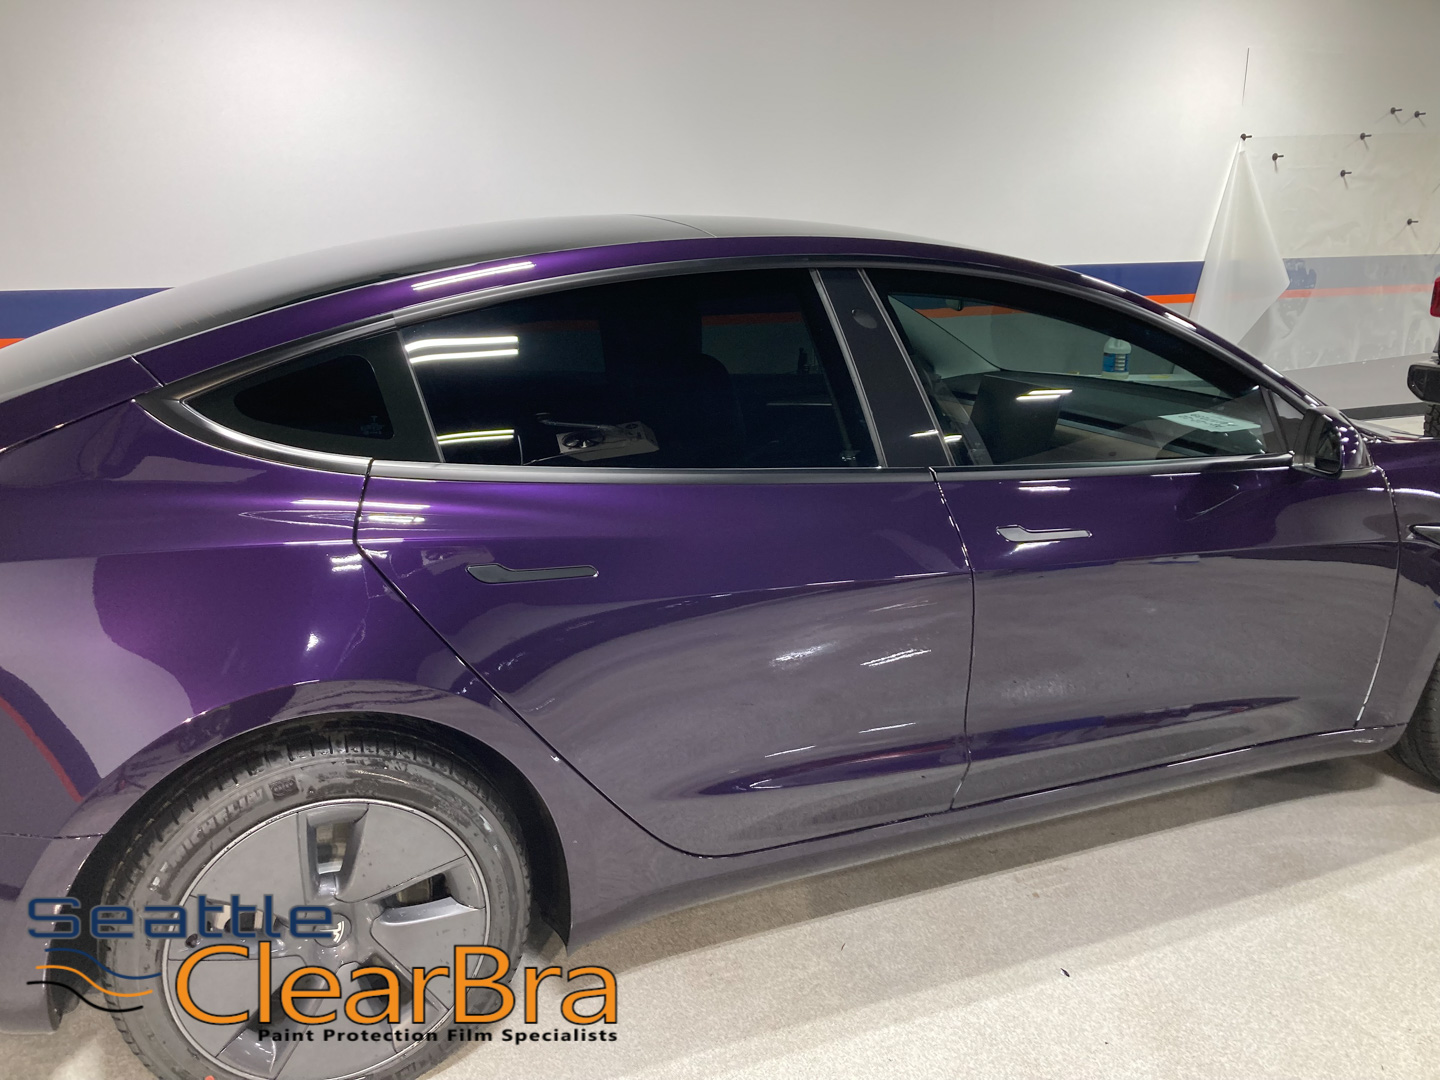 Tesla Xpel Redmond Clear Bra PPF Paint Protection - Seattle ClearBra